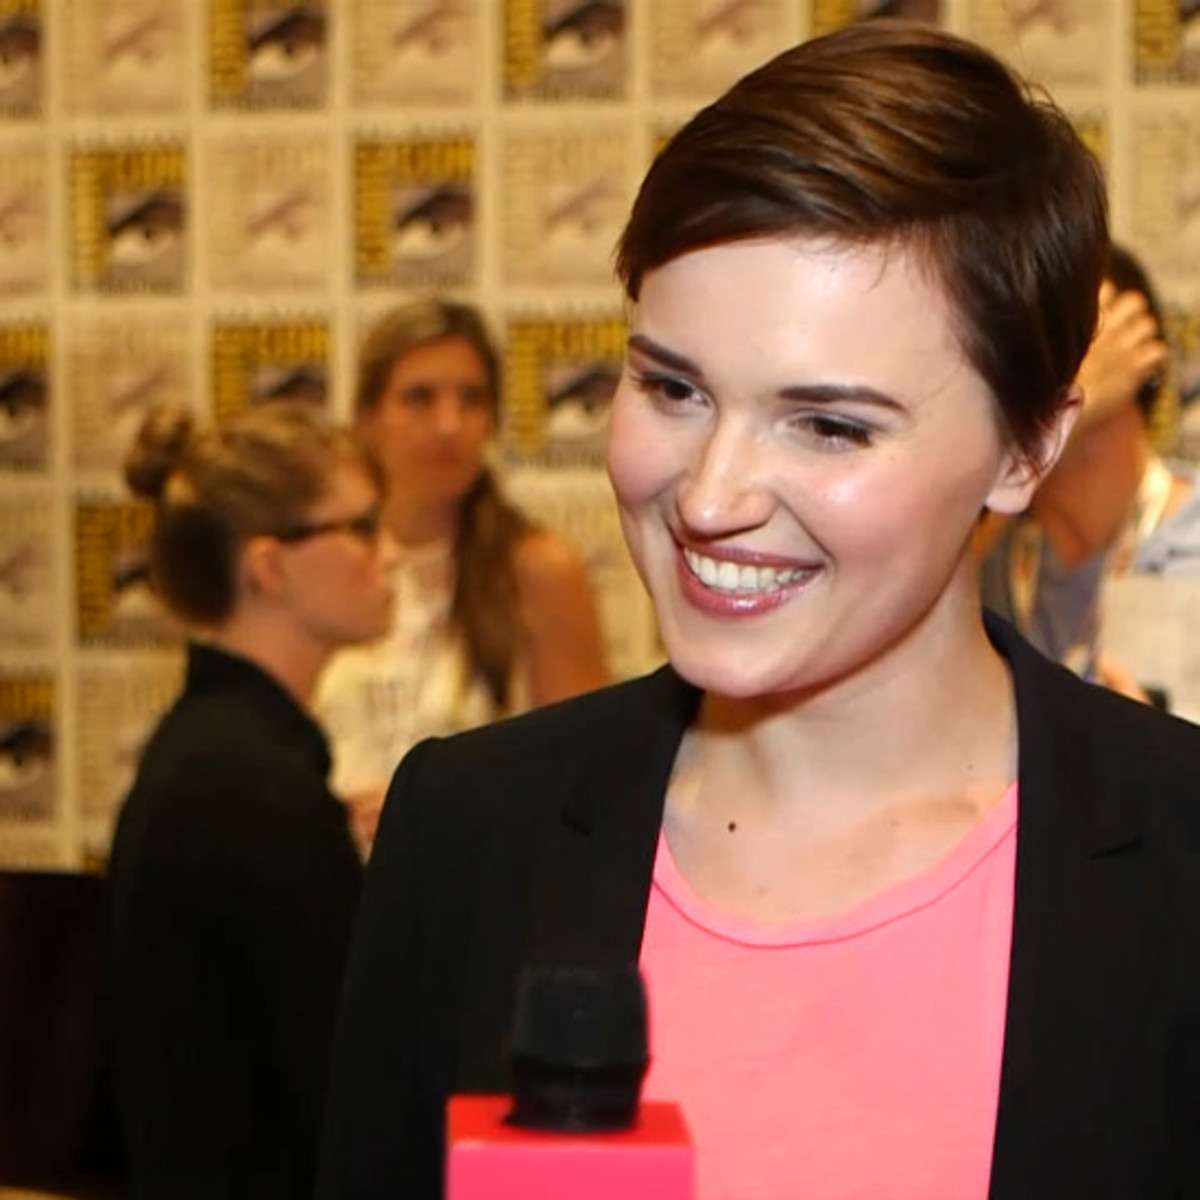 In an interview, Veronica Roth says she is happy with Shailene Woodey cast as Tris.